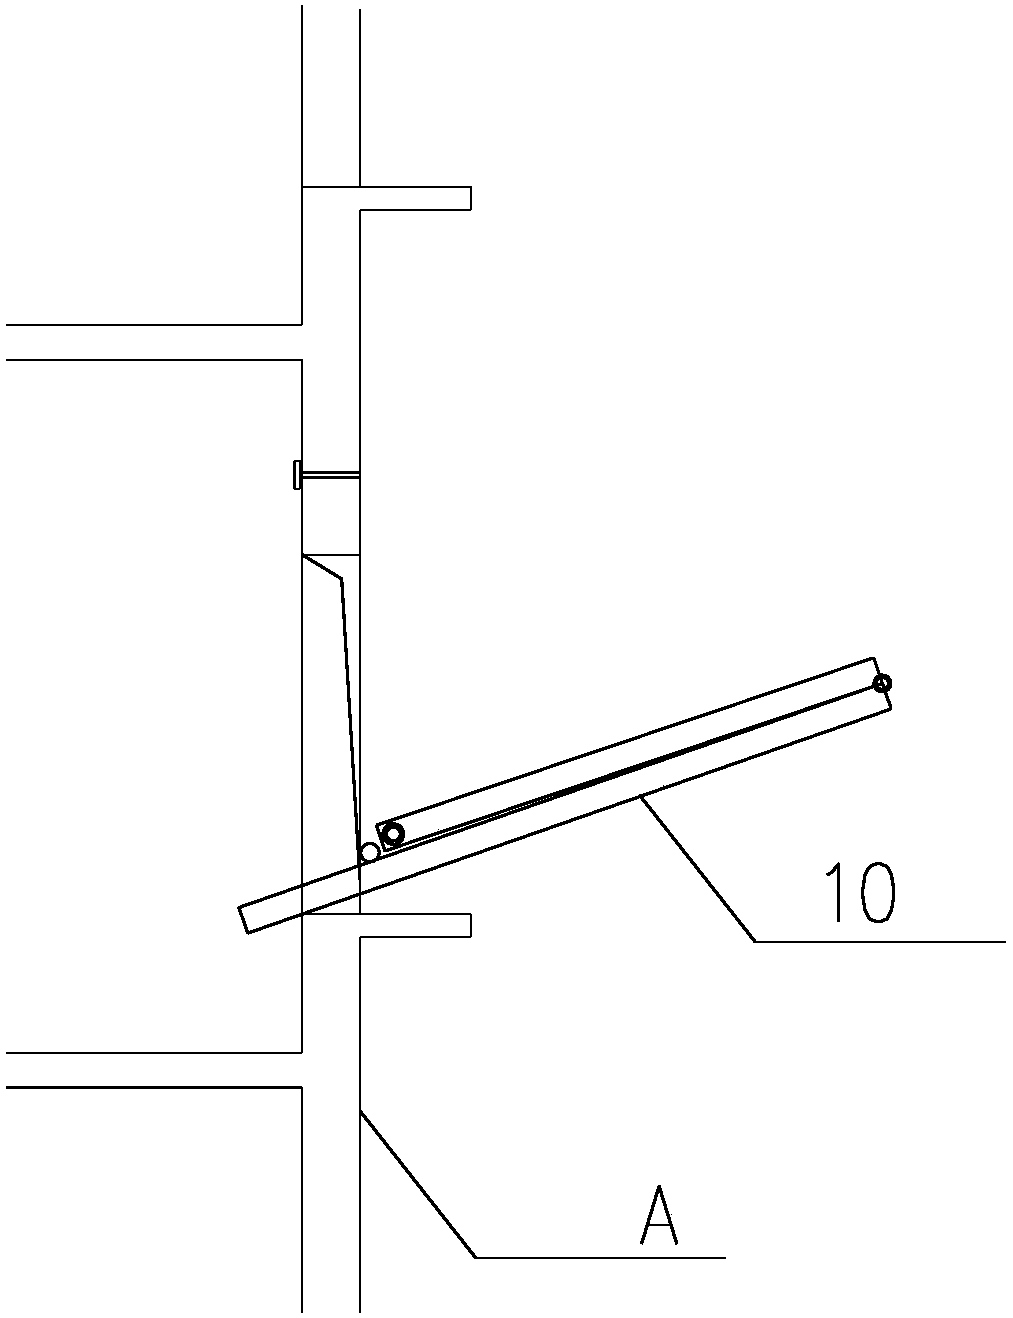 A prefabricated building folding throwing net and its installation method